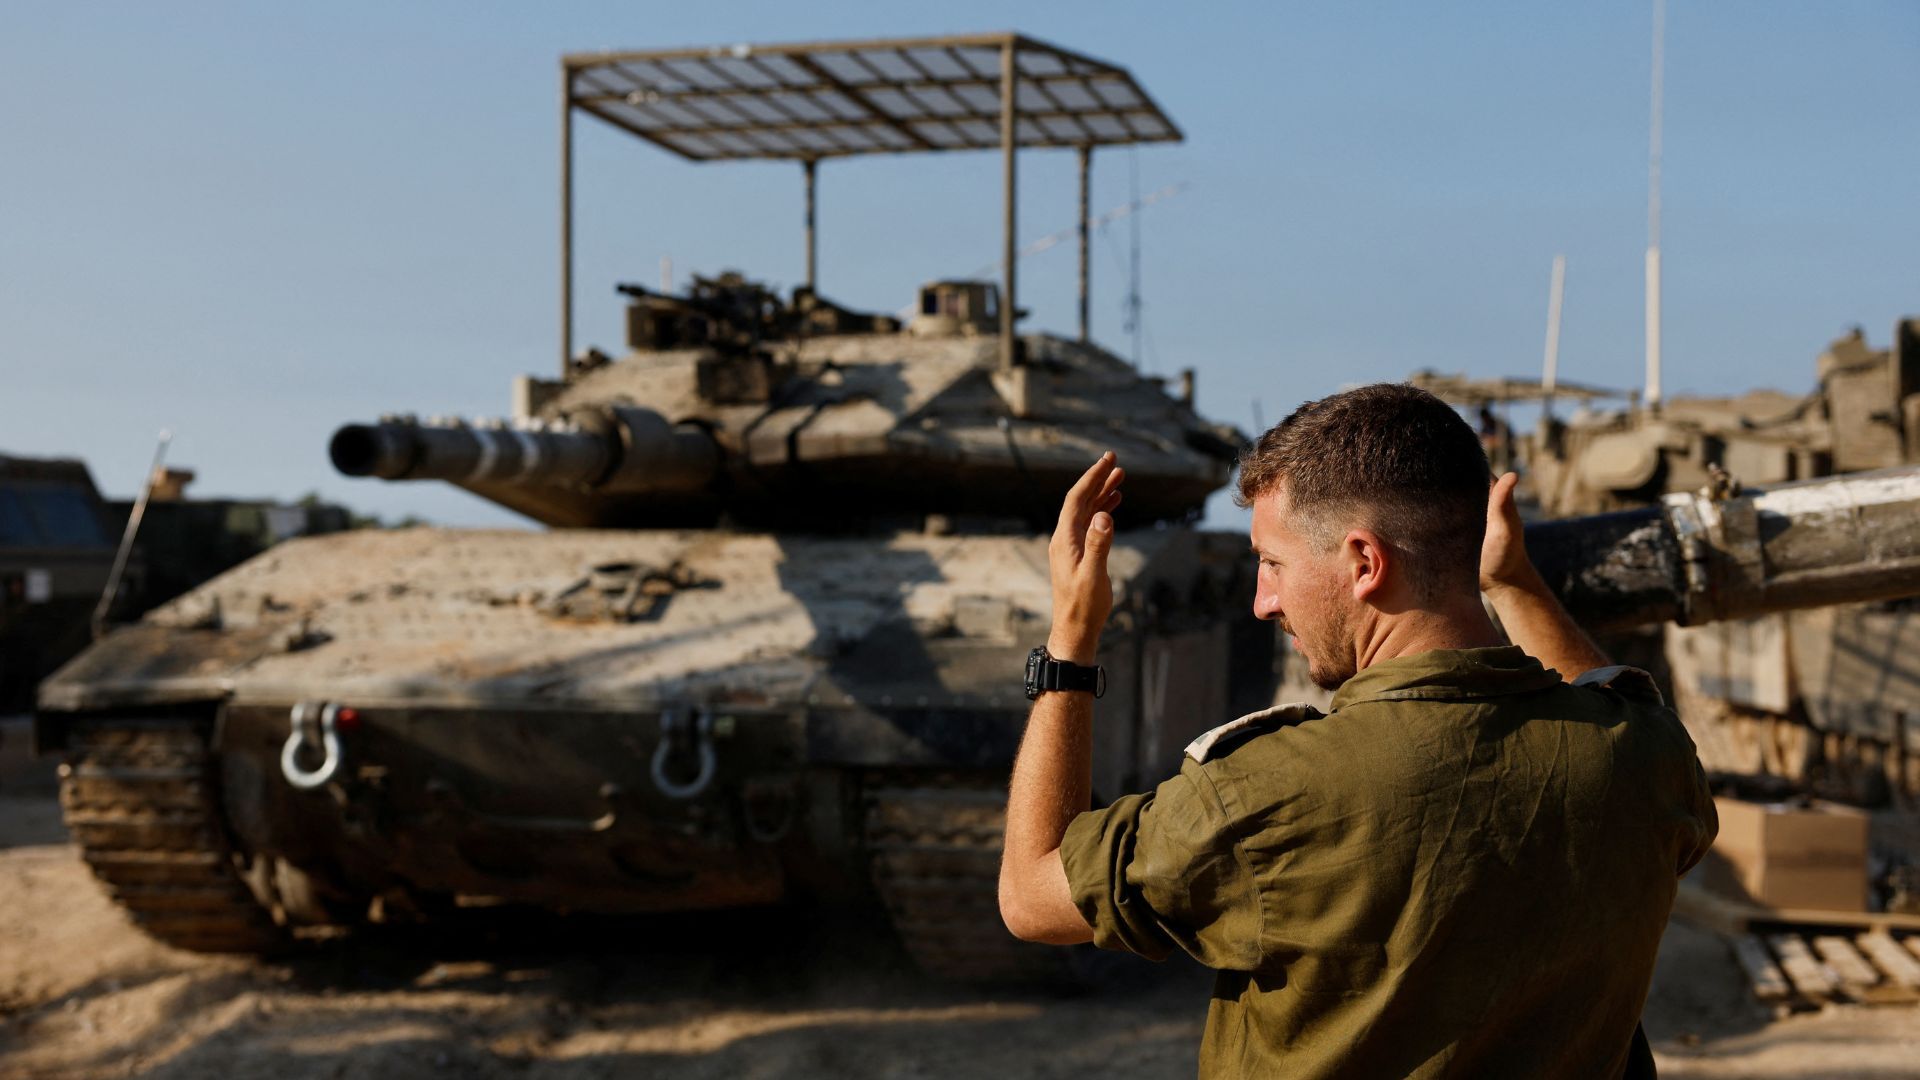 Is Israel’s Gaza War the most destructive yet with conventional weapons? | Israel-Palestine conflict